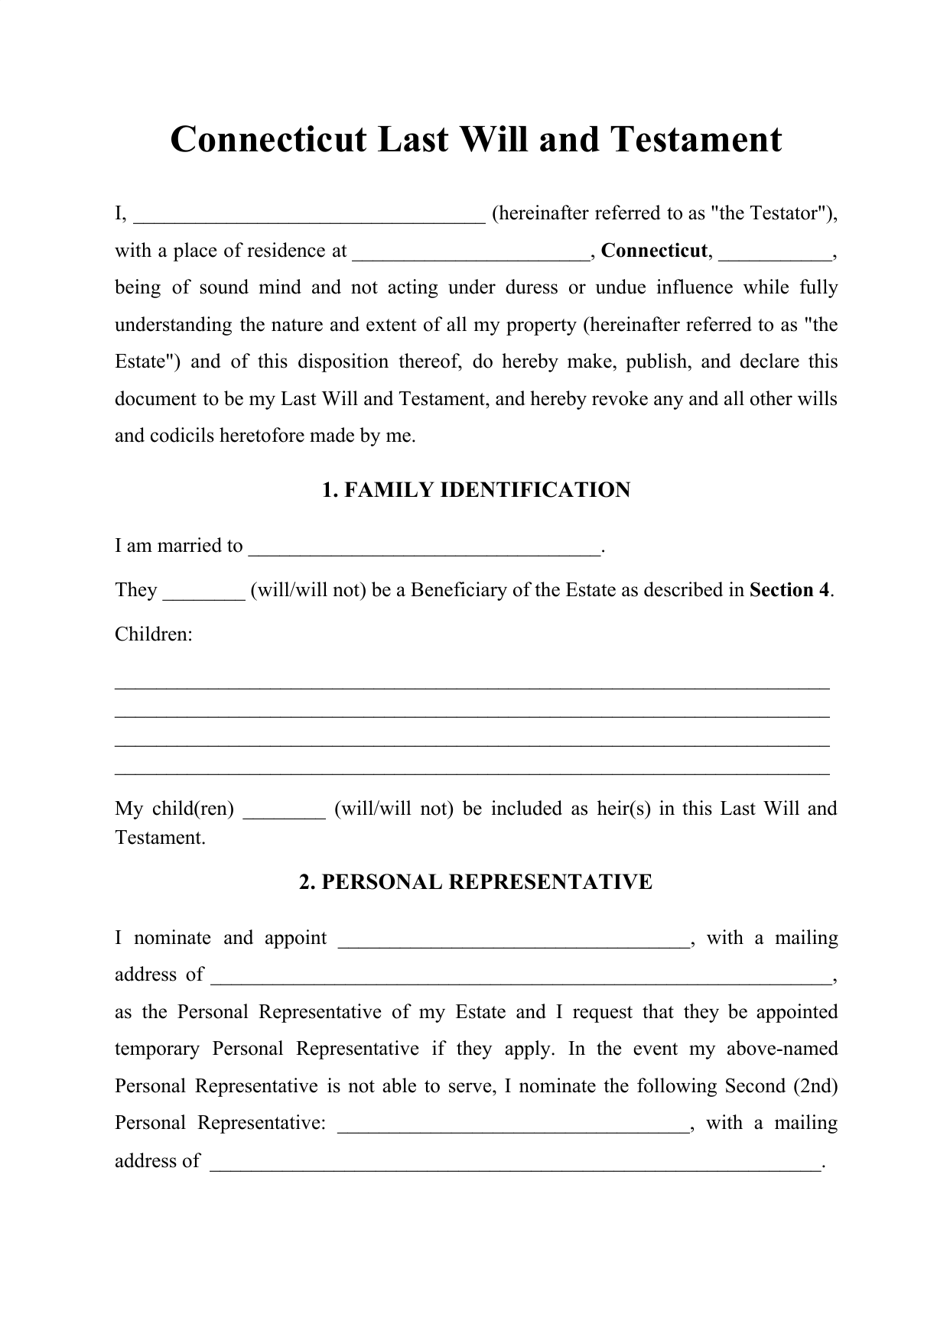 Last Will and Testament Template - Connecticut